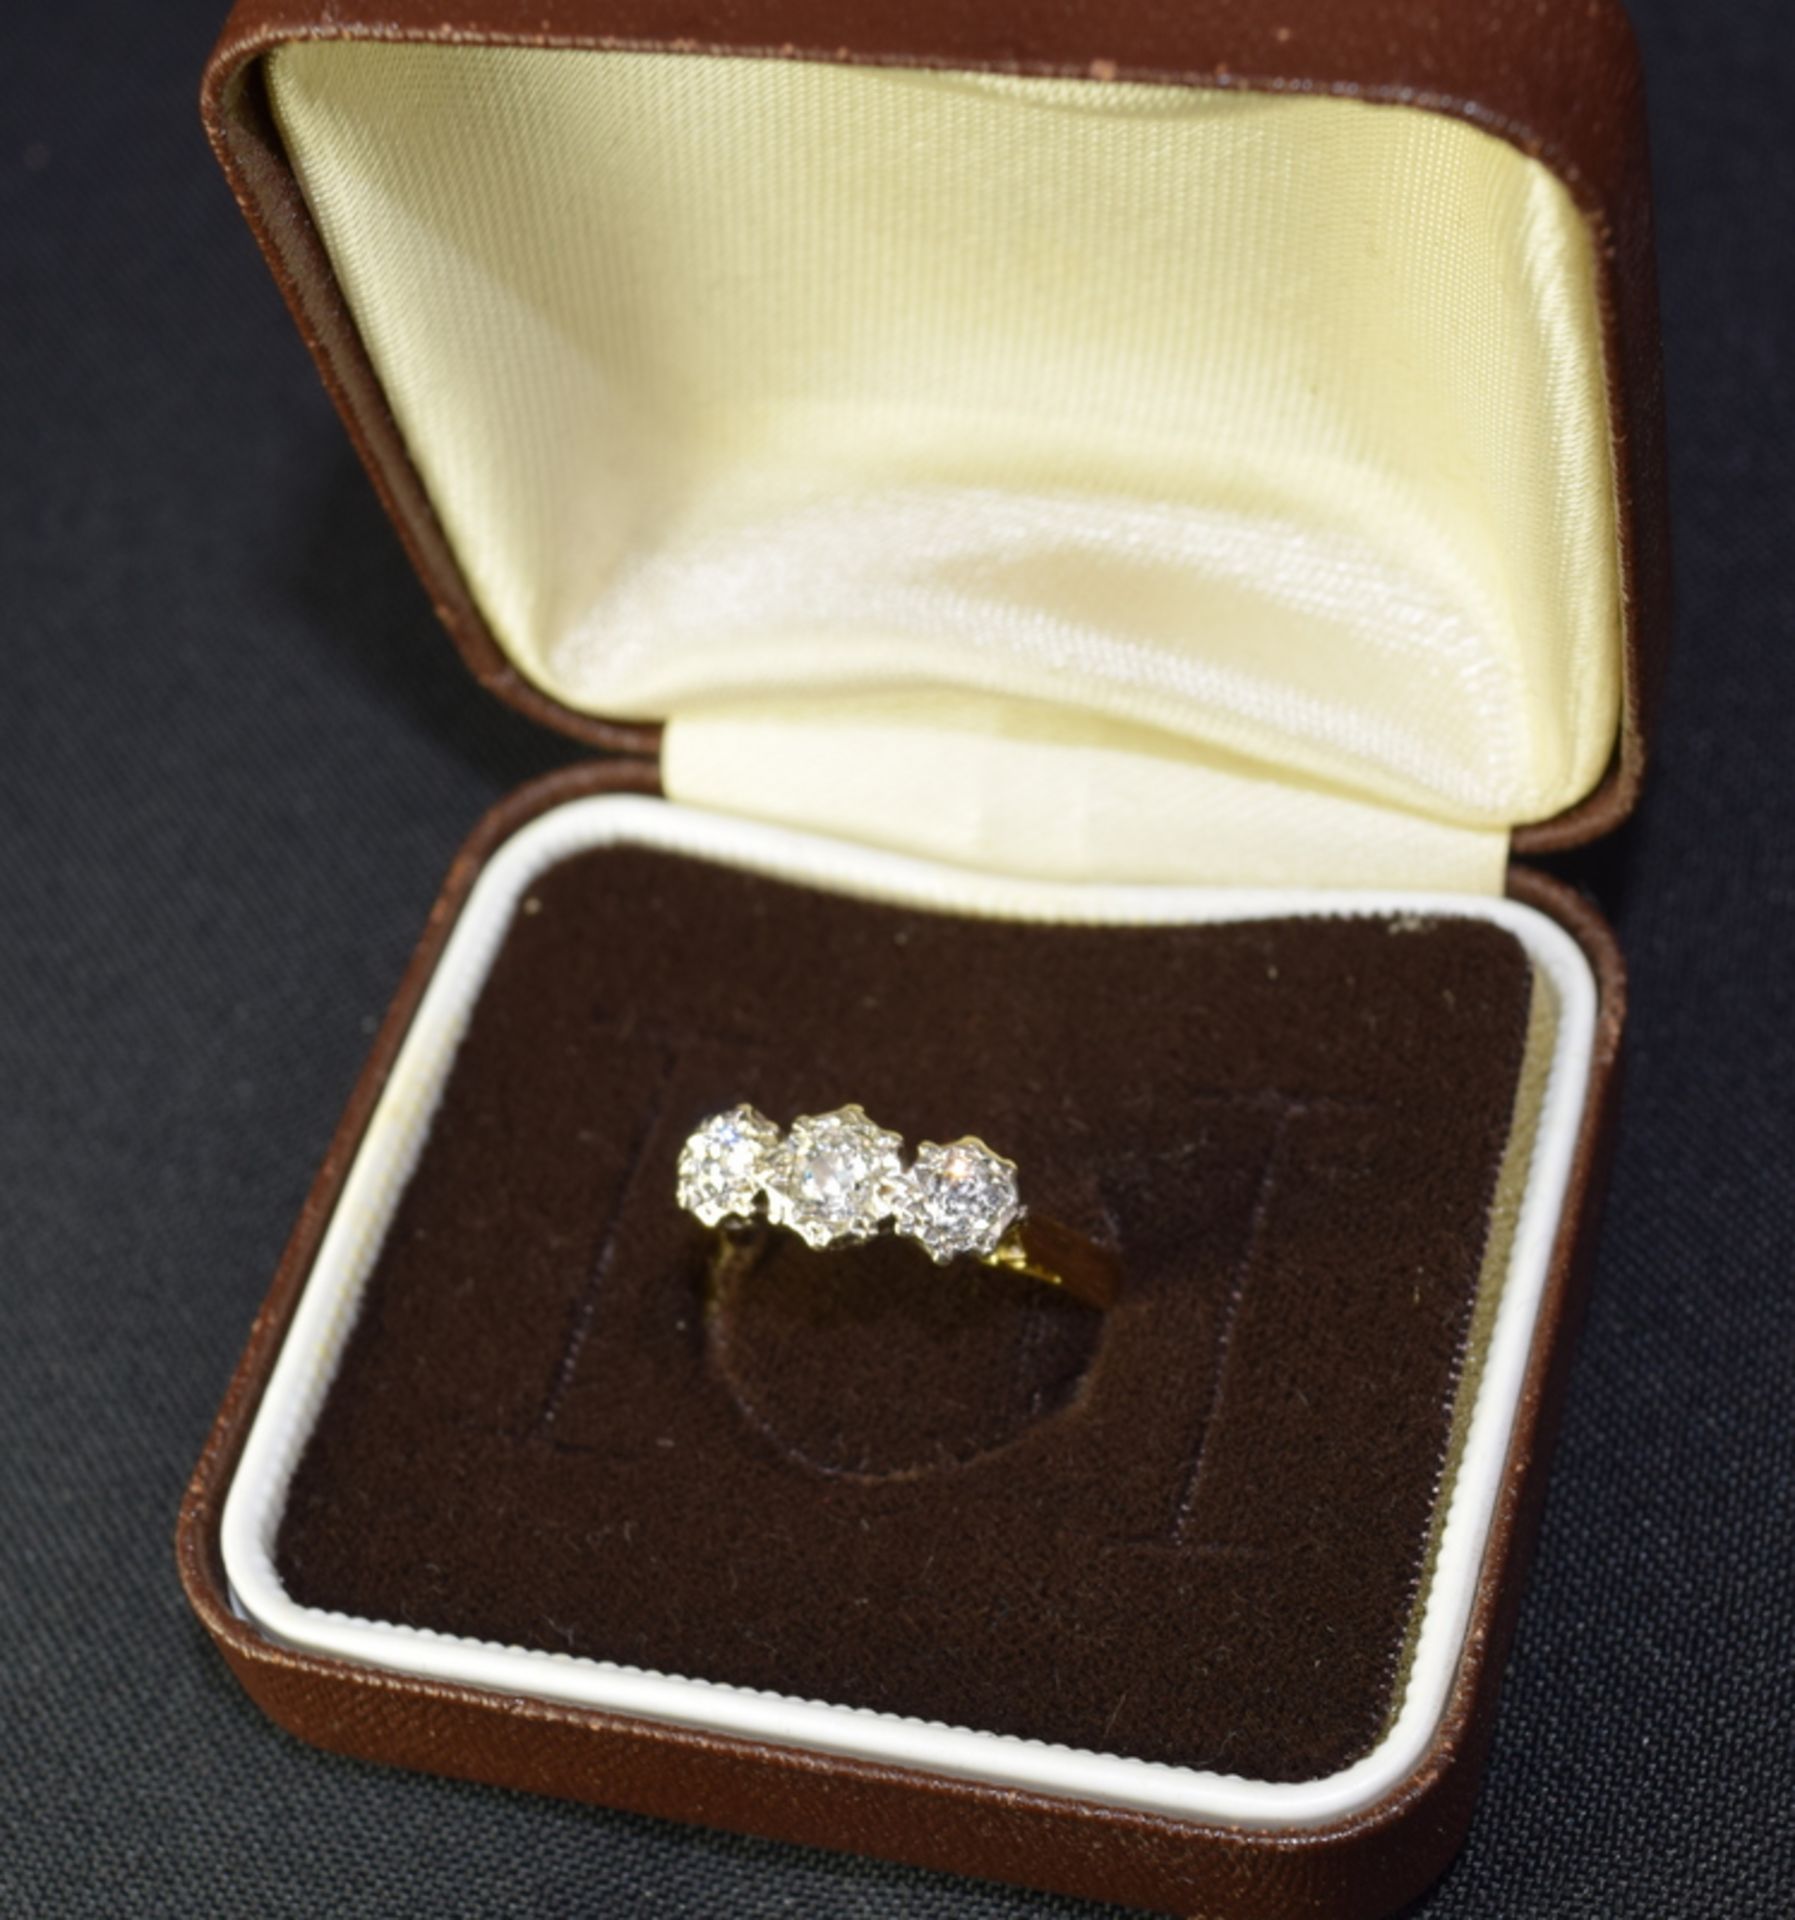 3 Diamond Trilogy Ring on 18ct gold band - Image 2 of 4